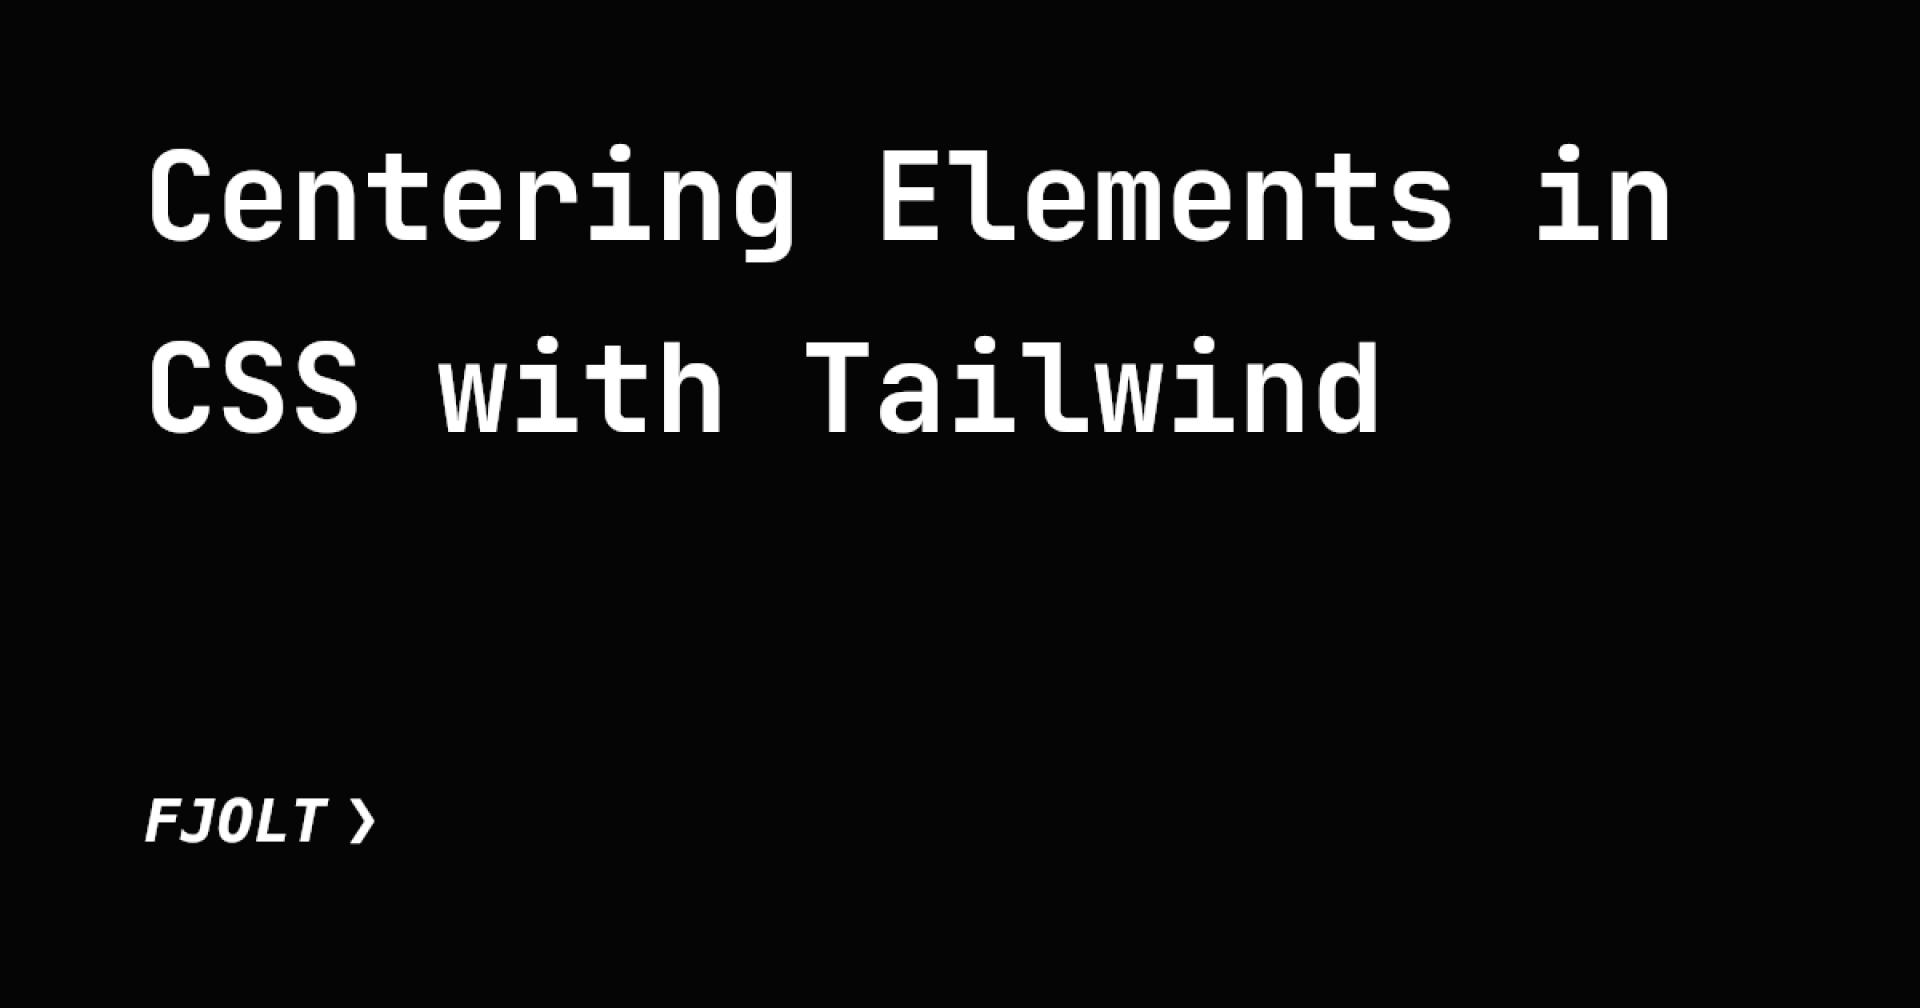 Centering Elements in CSS with Tailwind